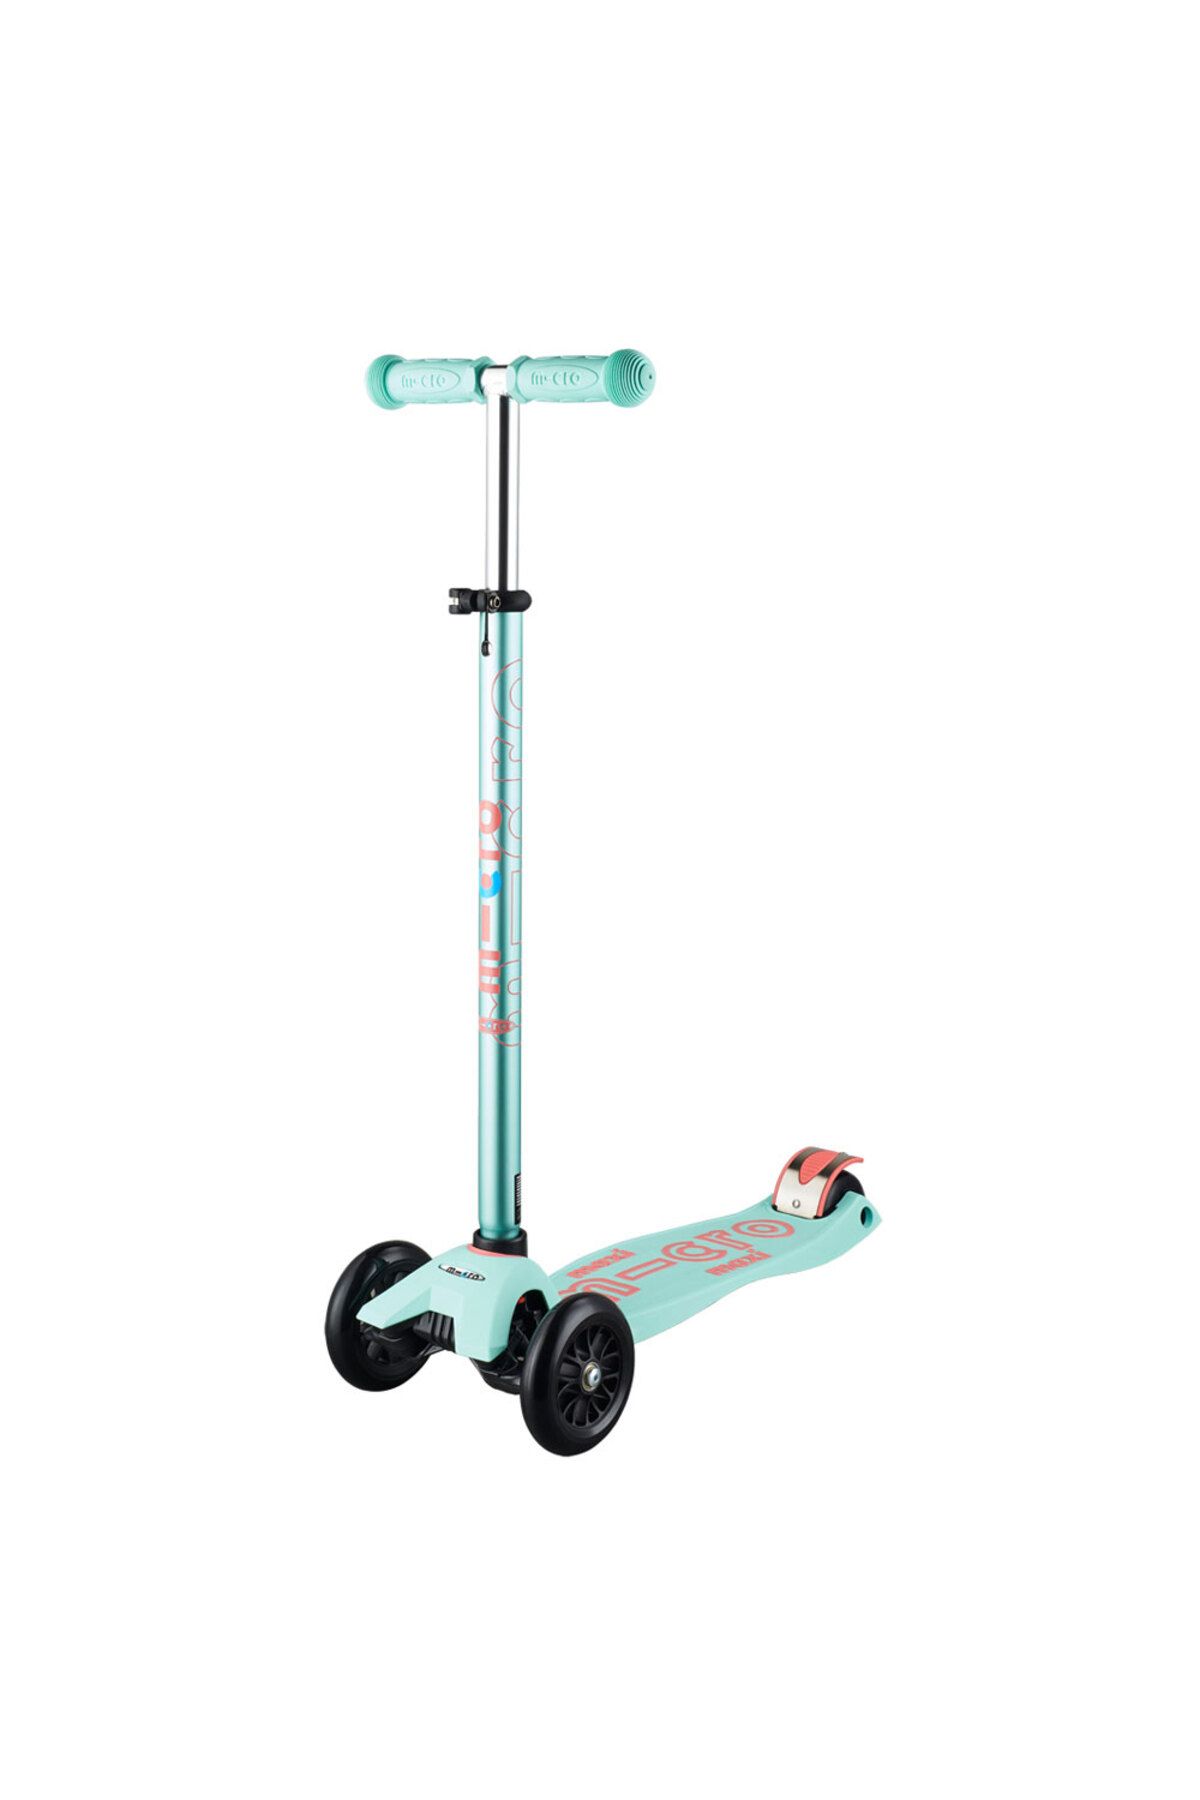 Micro Maxi Scooter Deluxe Mint Mmd070